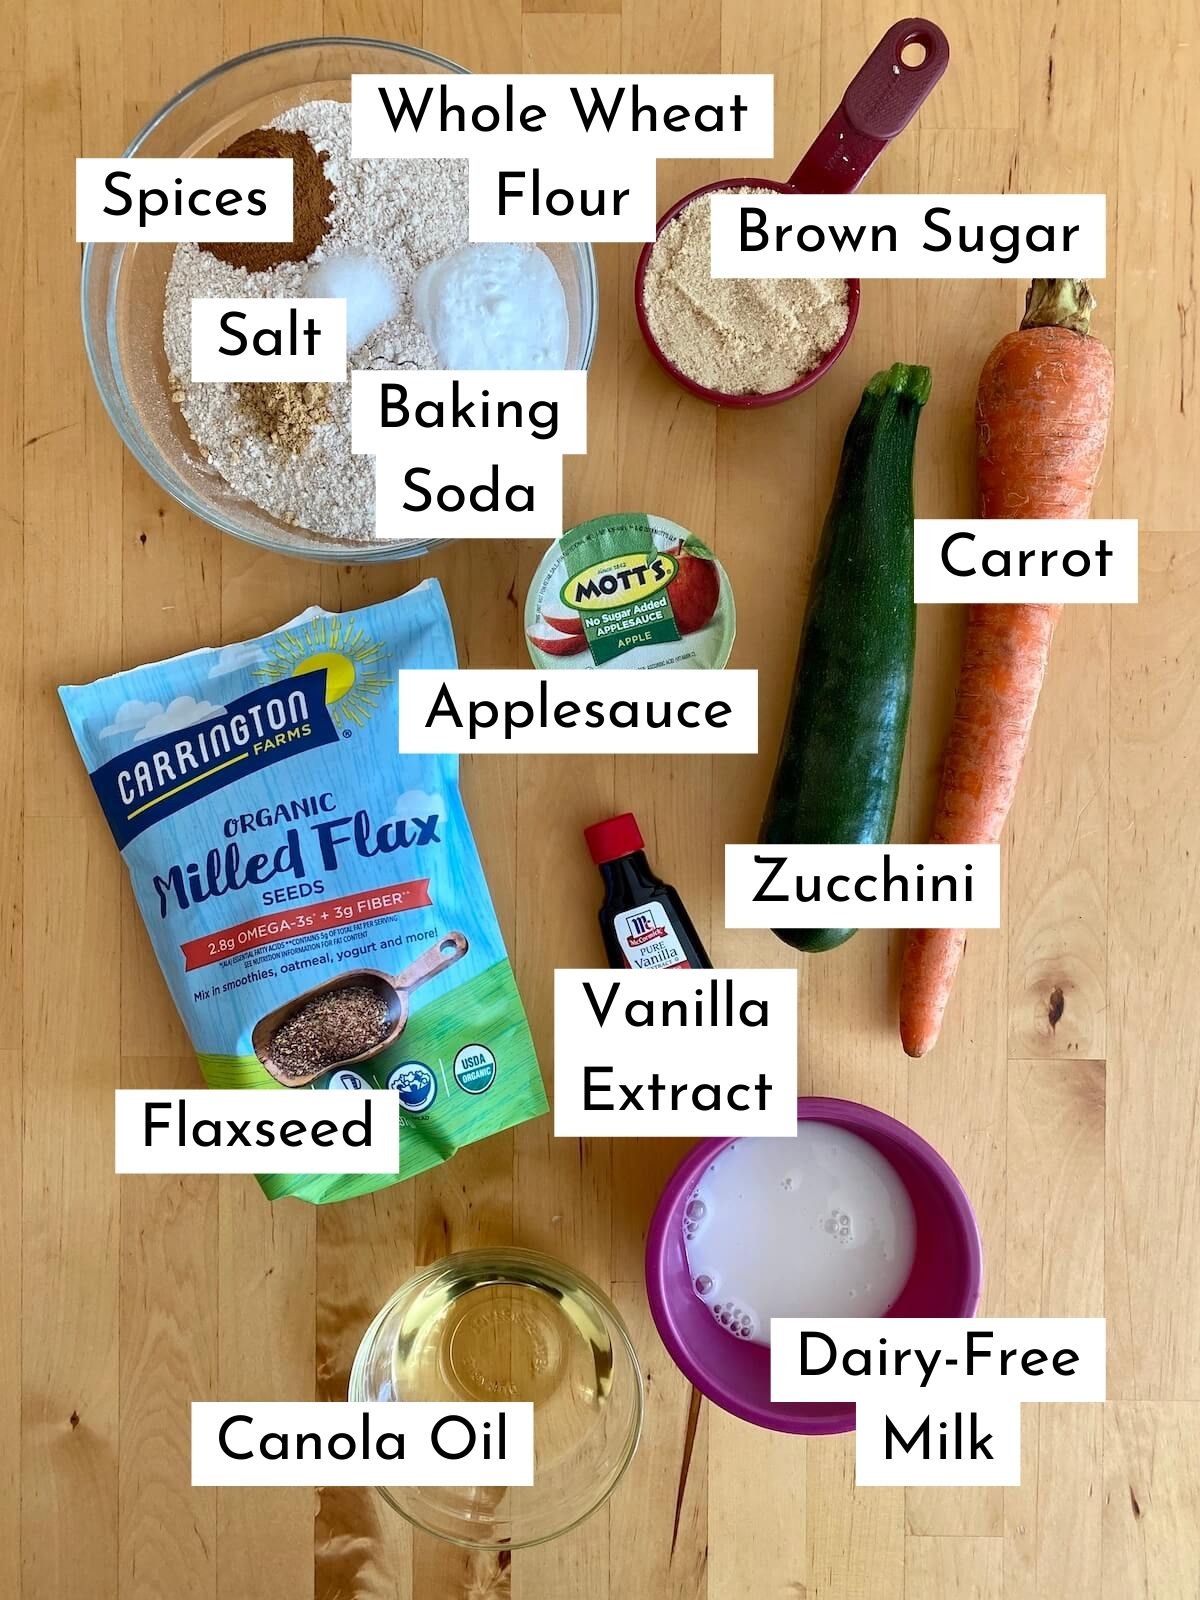 All of the ingredients to make zucchini carrot muffins laid out on a counter. There is text over each ingredient labeling what it is. The ingredients are whole wheat flour, brown sugar, baking soda, salt, spices, applesauce, zucchini, carrots, flaxseed, vanilla extract, canola oil, and dairy-free milk.